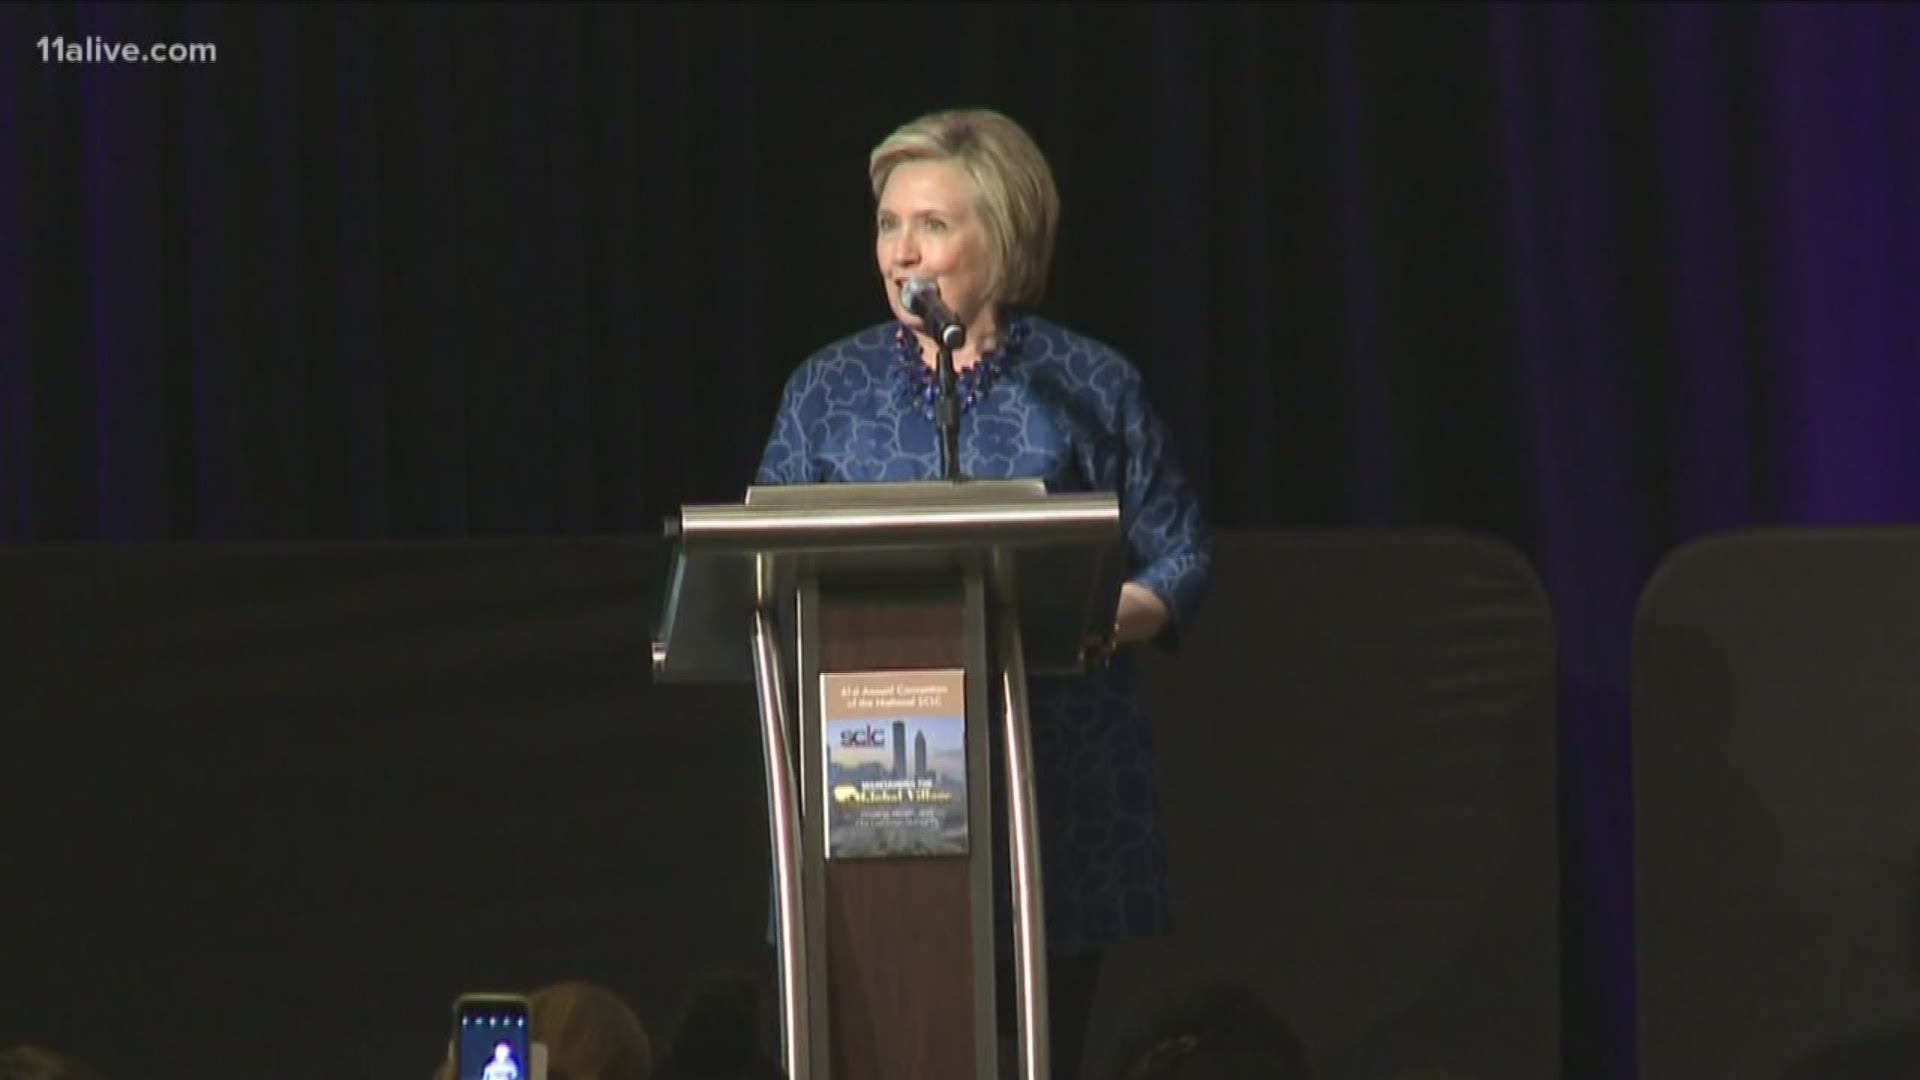 During Friday afternoon's Southern Christian Leadership Conference Women's Empowerment Luncheon, former U.S. Secretary of State Hillary Rodham Clinton condemned statements from President Donald Trump.